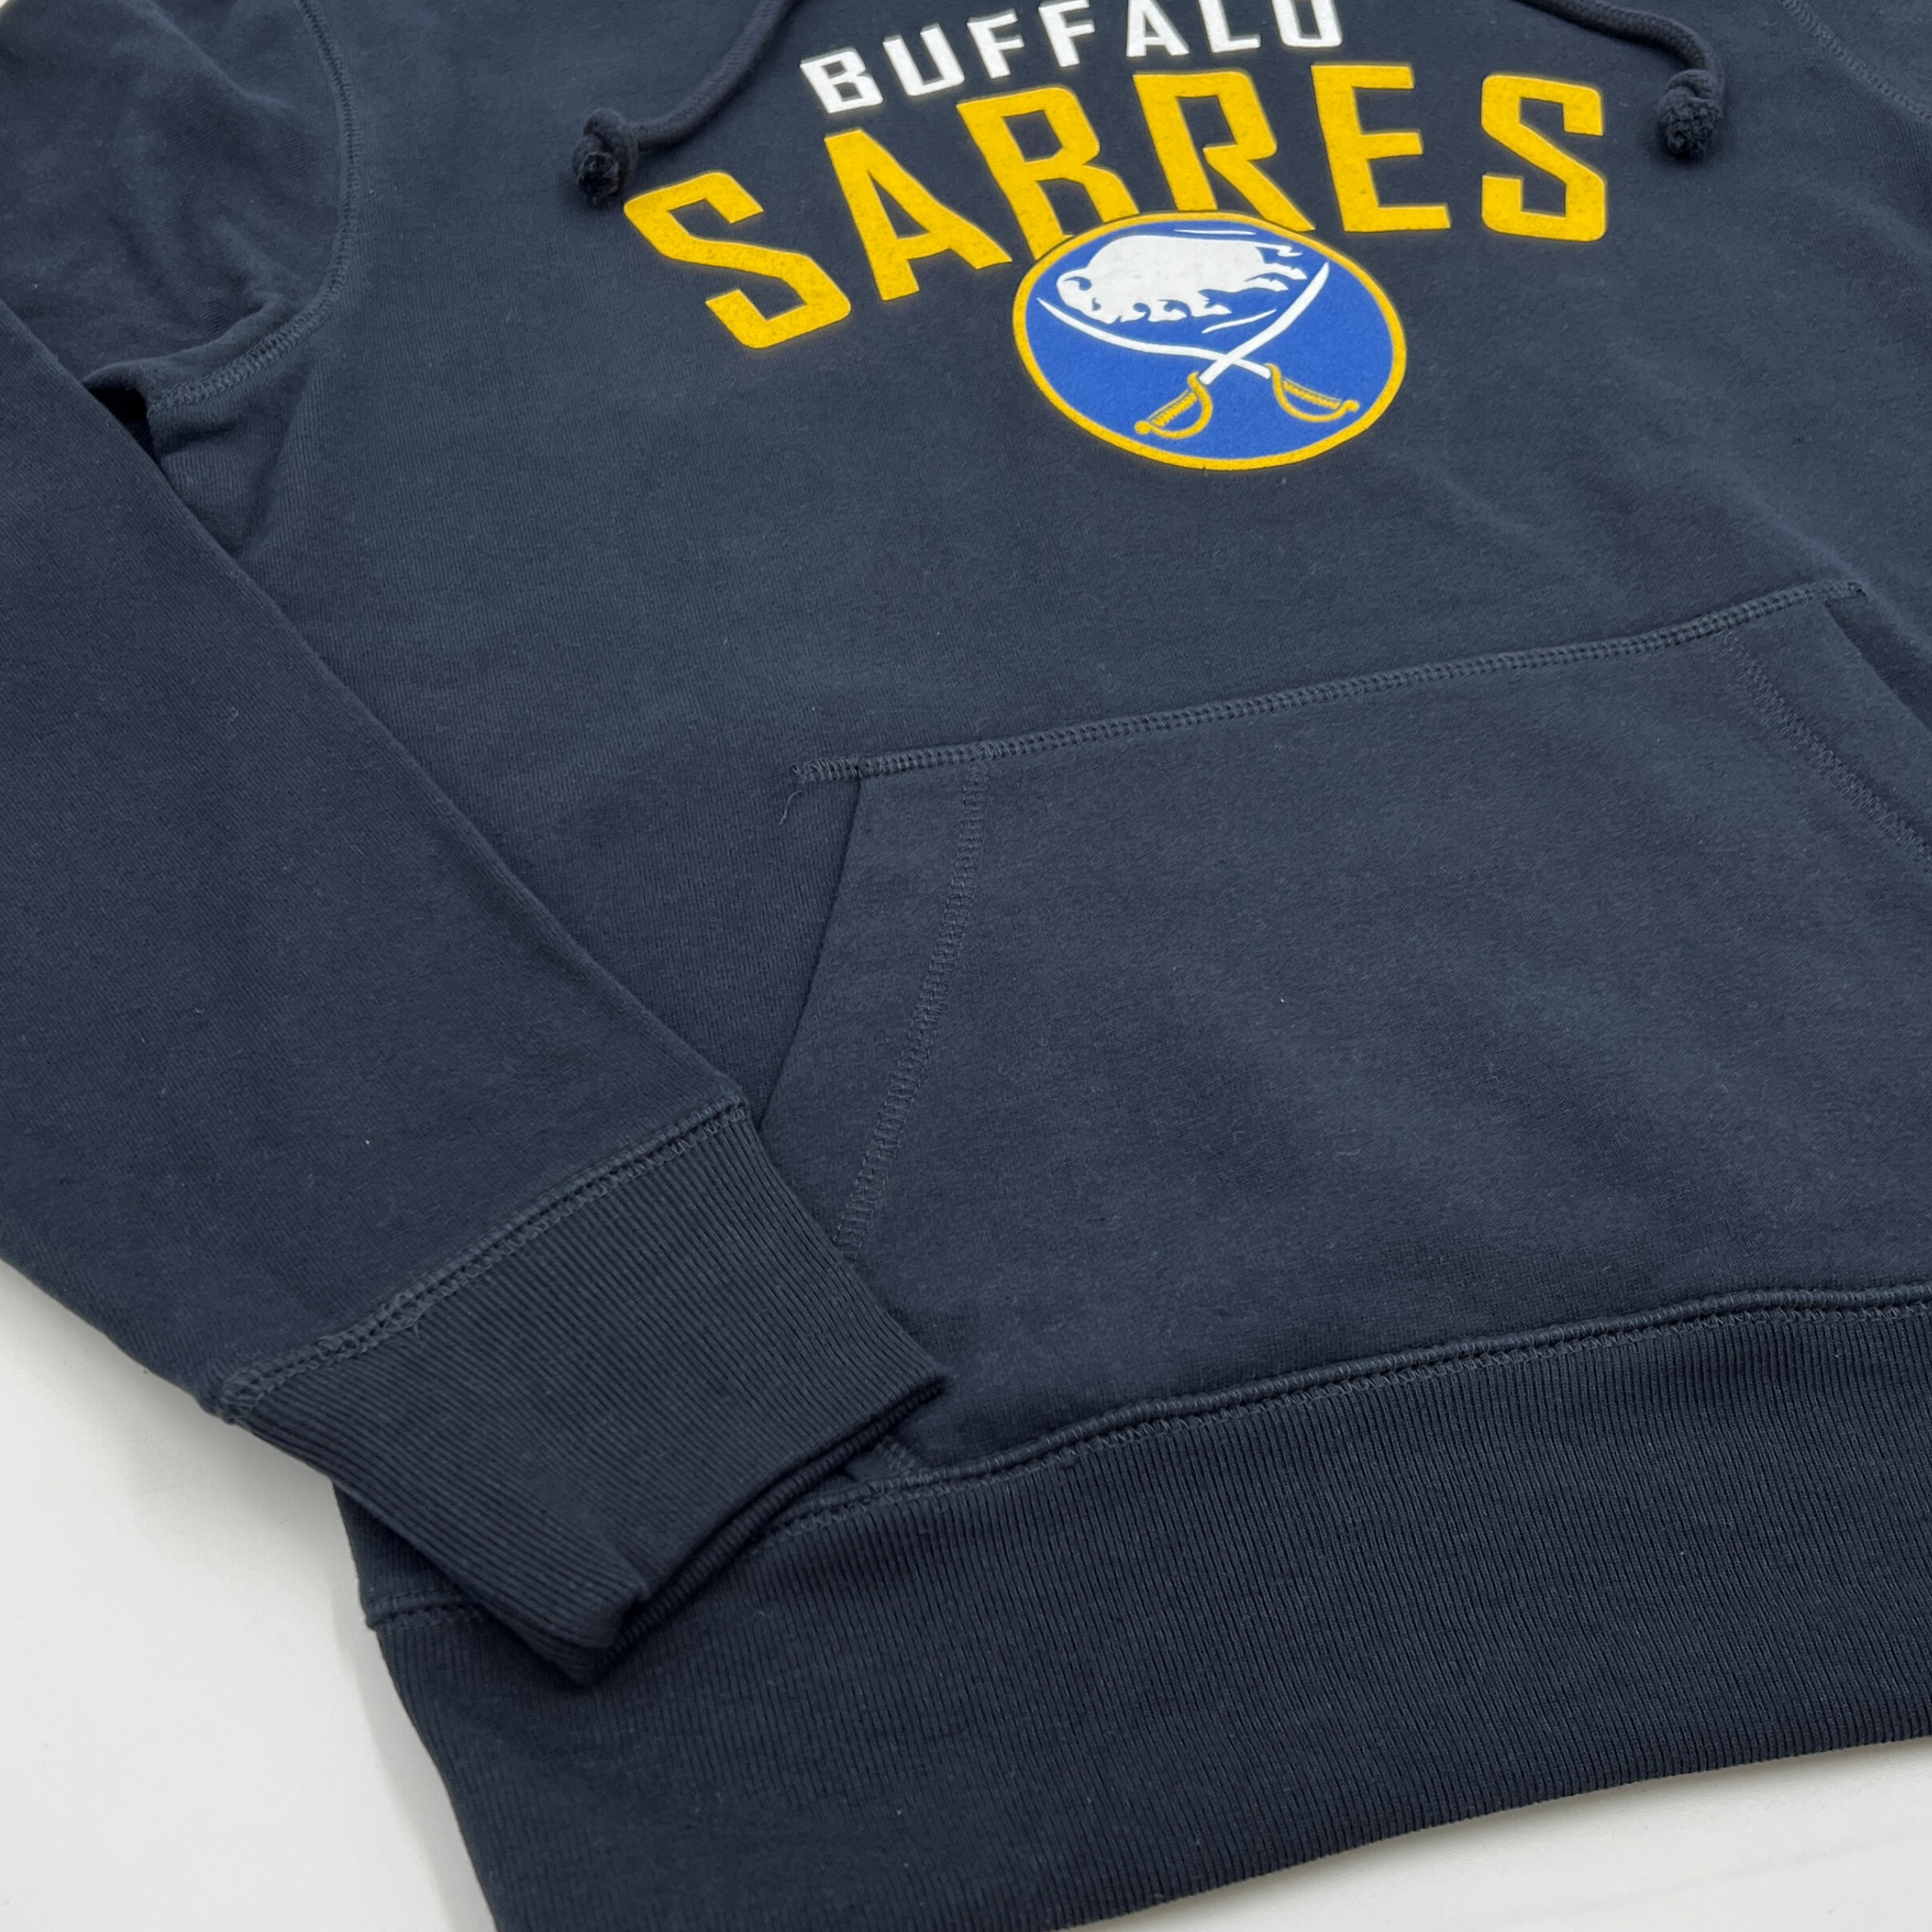 '47 Brand Buffalo Sabres Navy With Royal & Gold Logo Hoodie